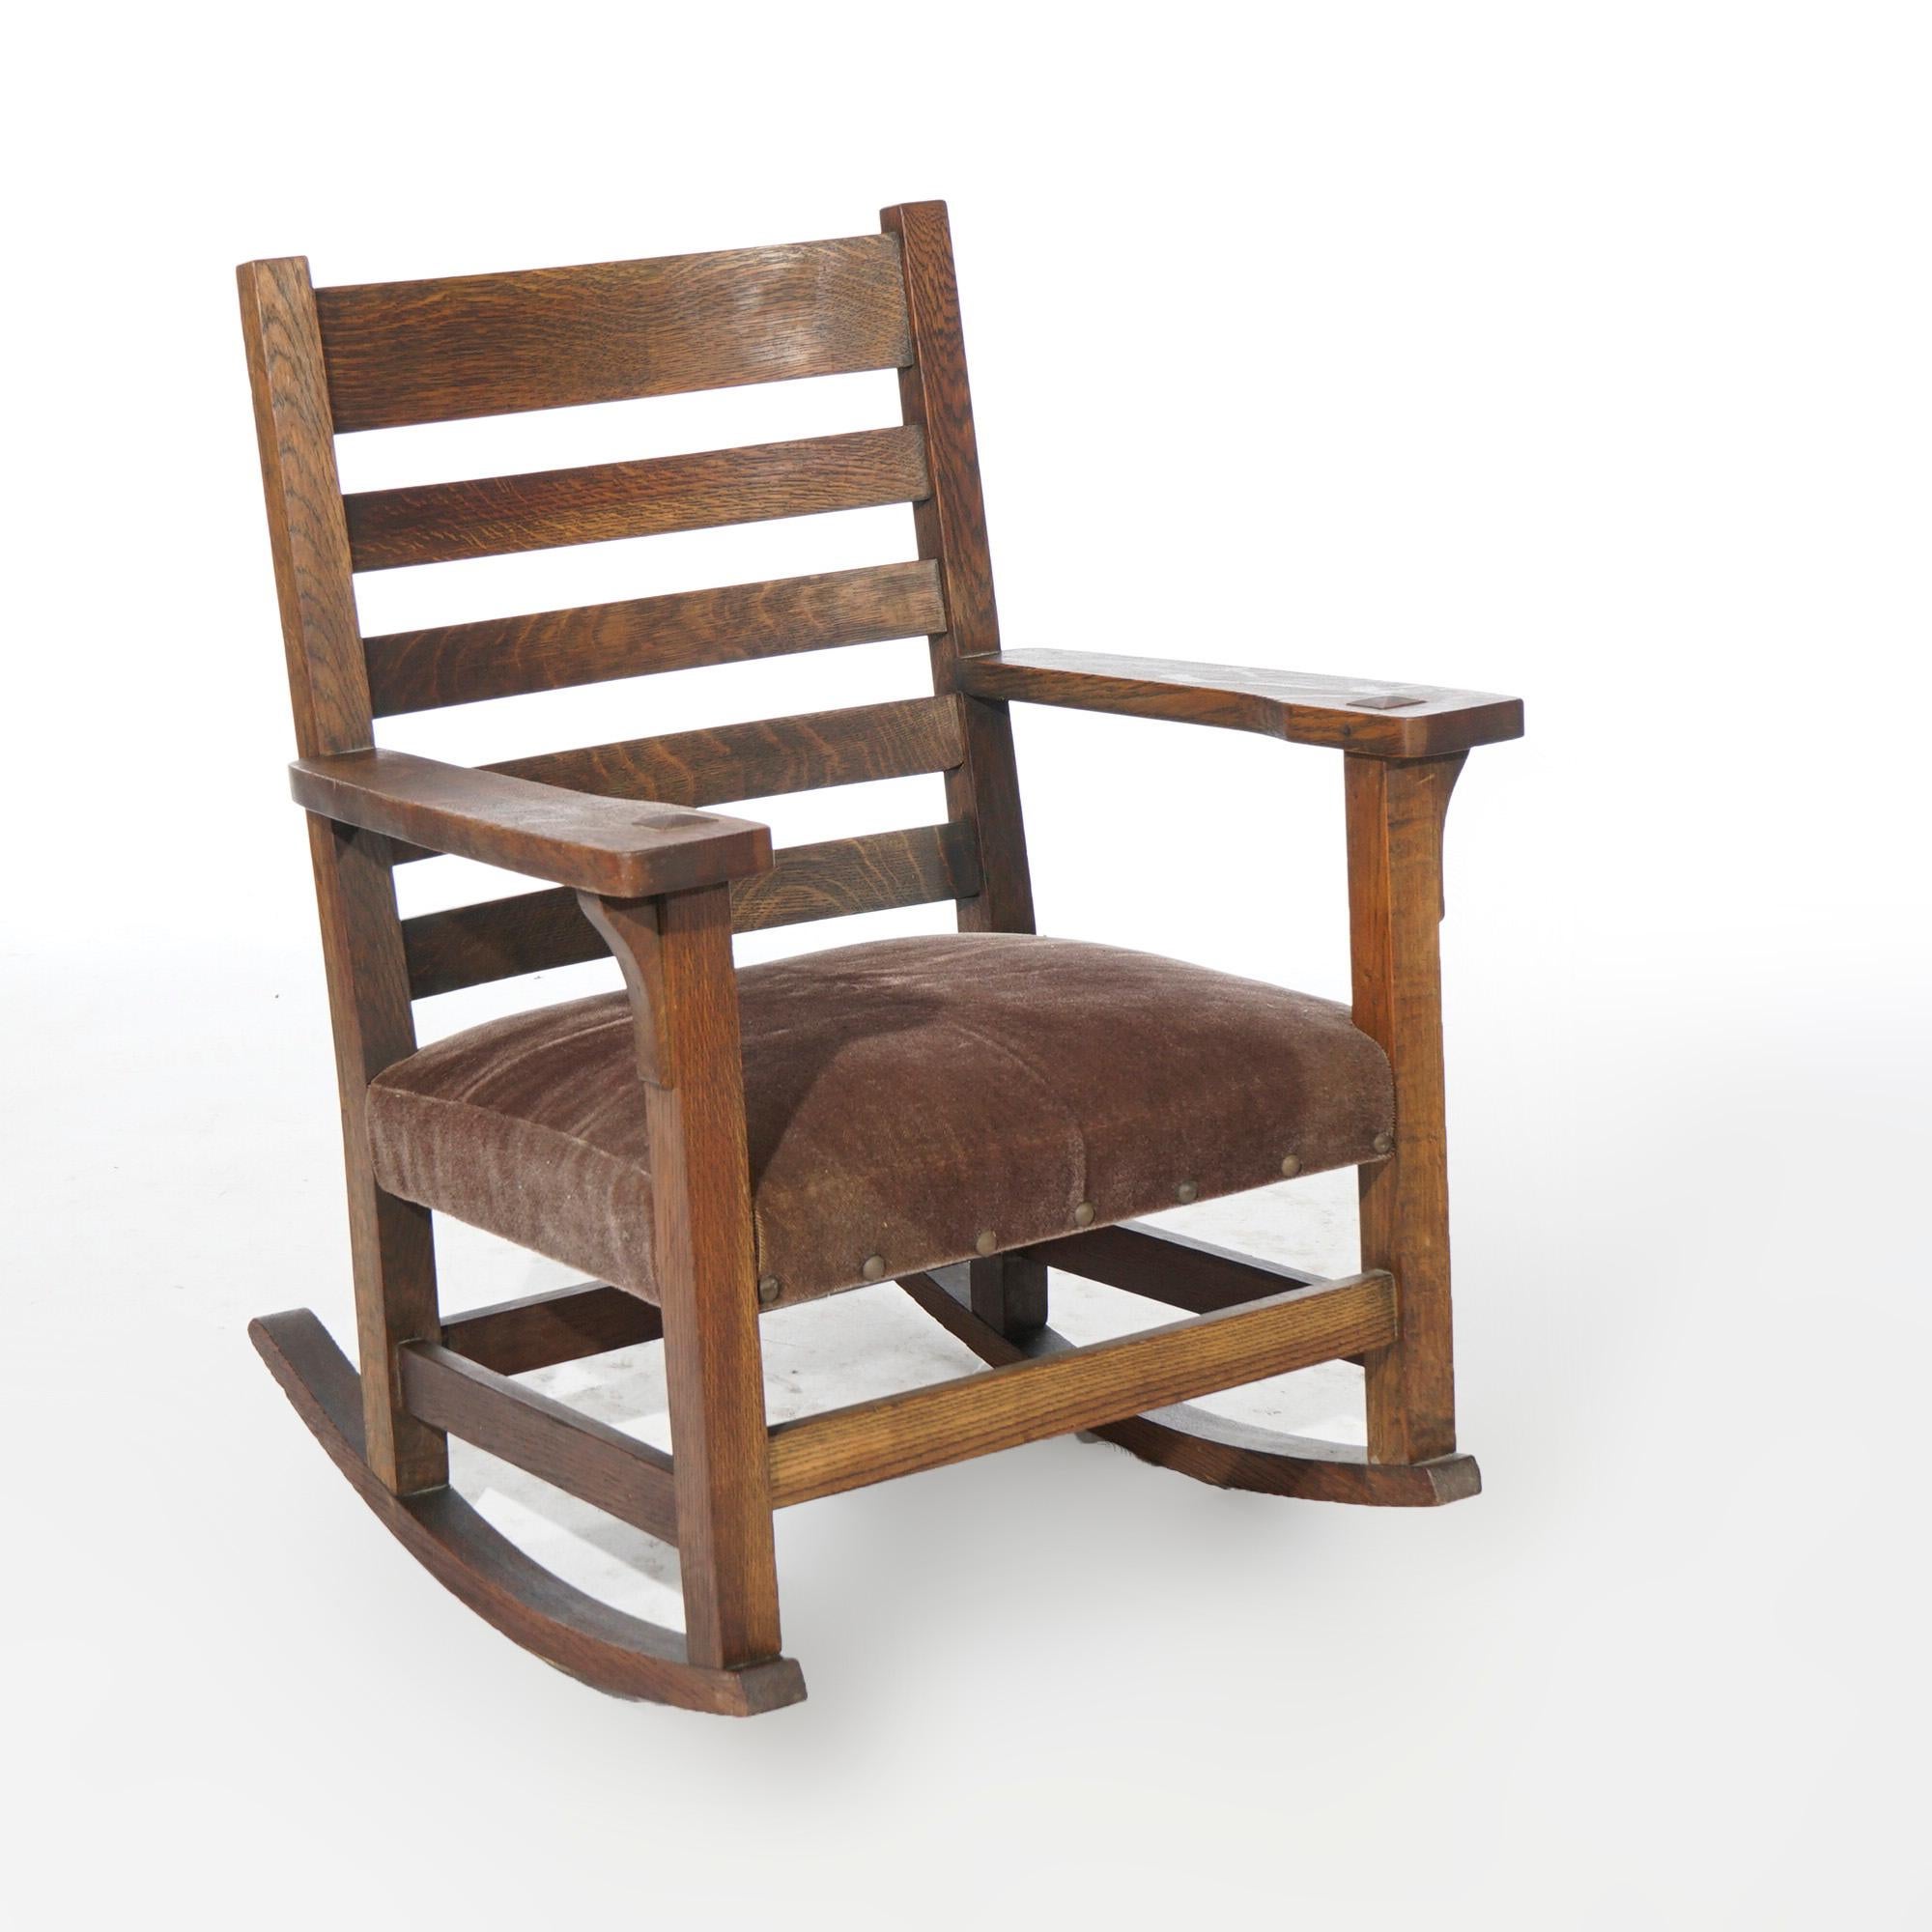 An antique Arts and Crafts Mission rocking chair by JM Young offers quarter sawn oak construction with ladder back over upholstered seat and arms with convex corbels, c1910

Measures- 35''H x 27.5''W x 28.5''D; 16'' seat height

*Ask about